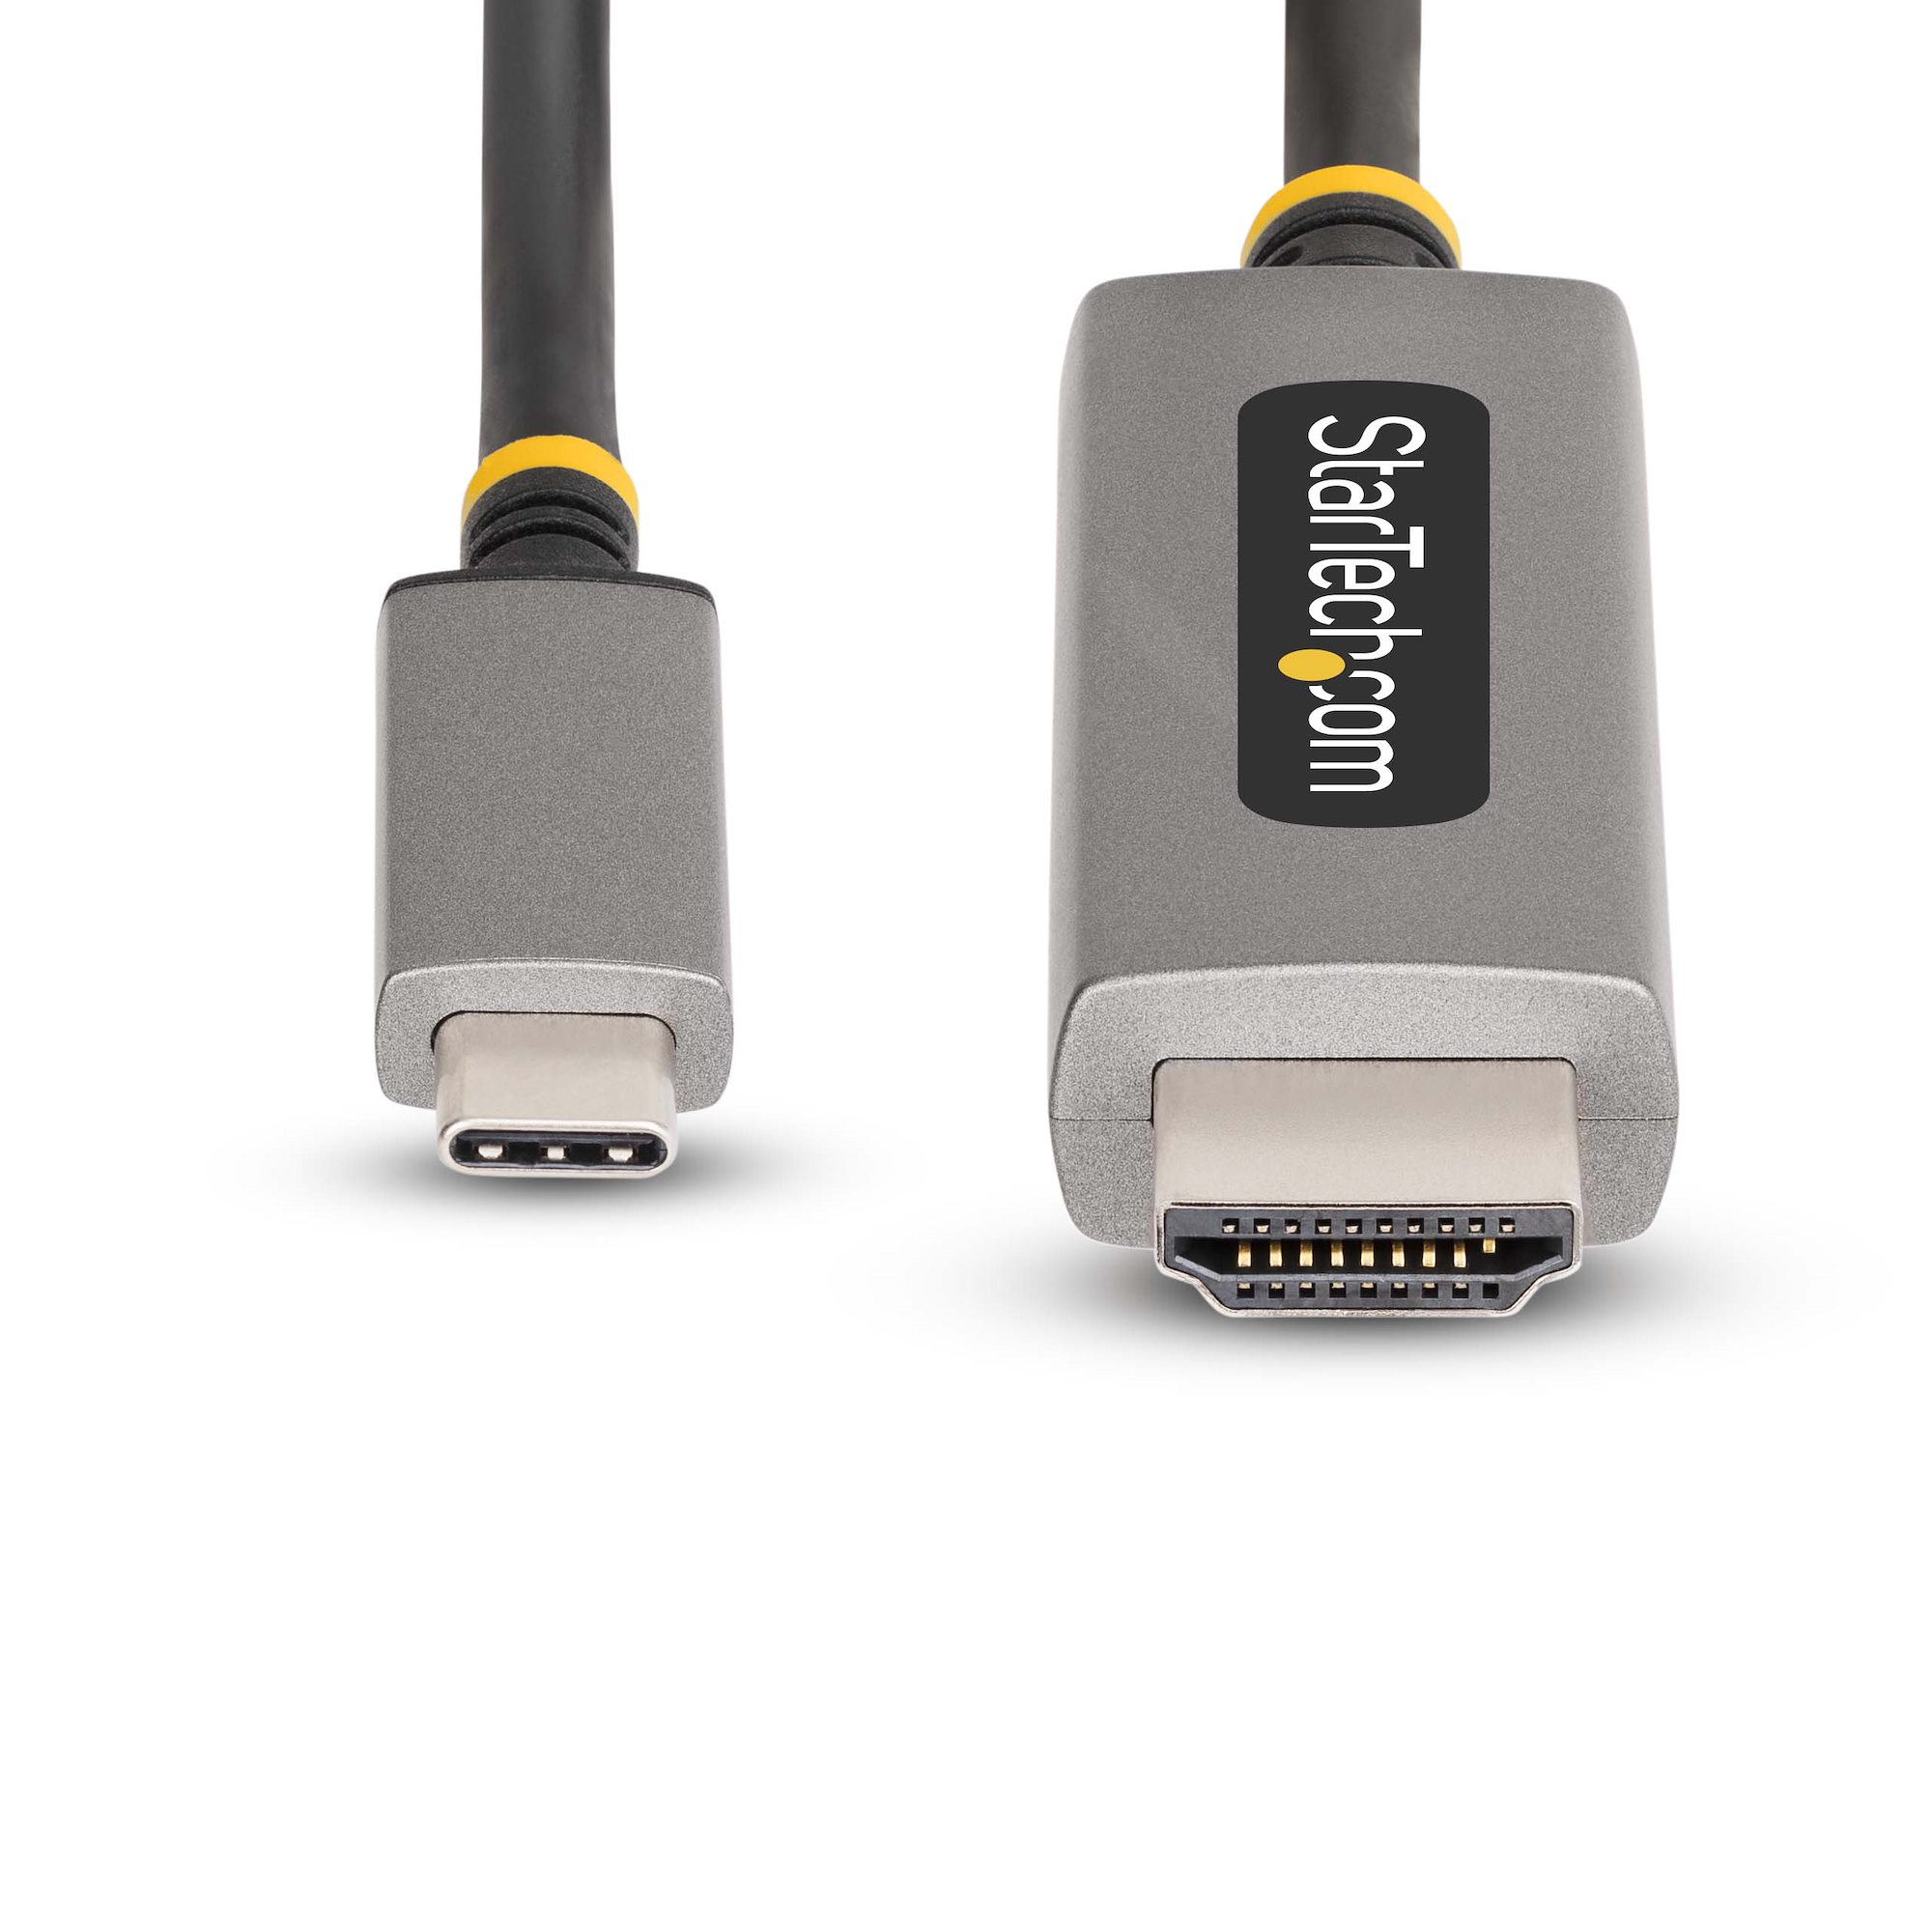 StarTech.com 3ft 1m USB C to HDMI Cable - 4K USB Type-C HDMI Video